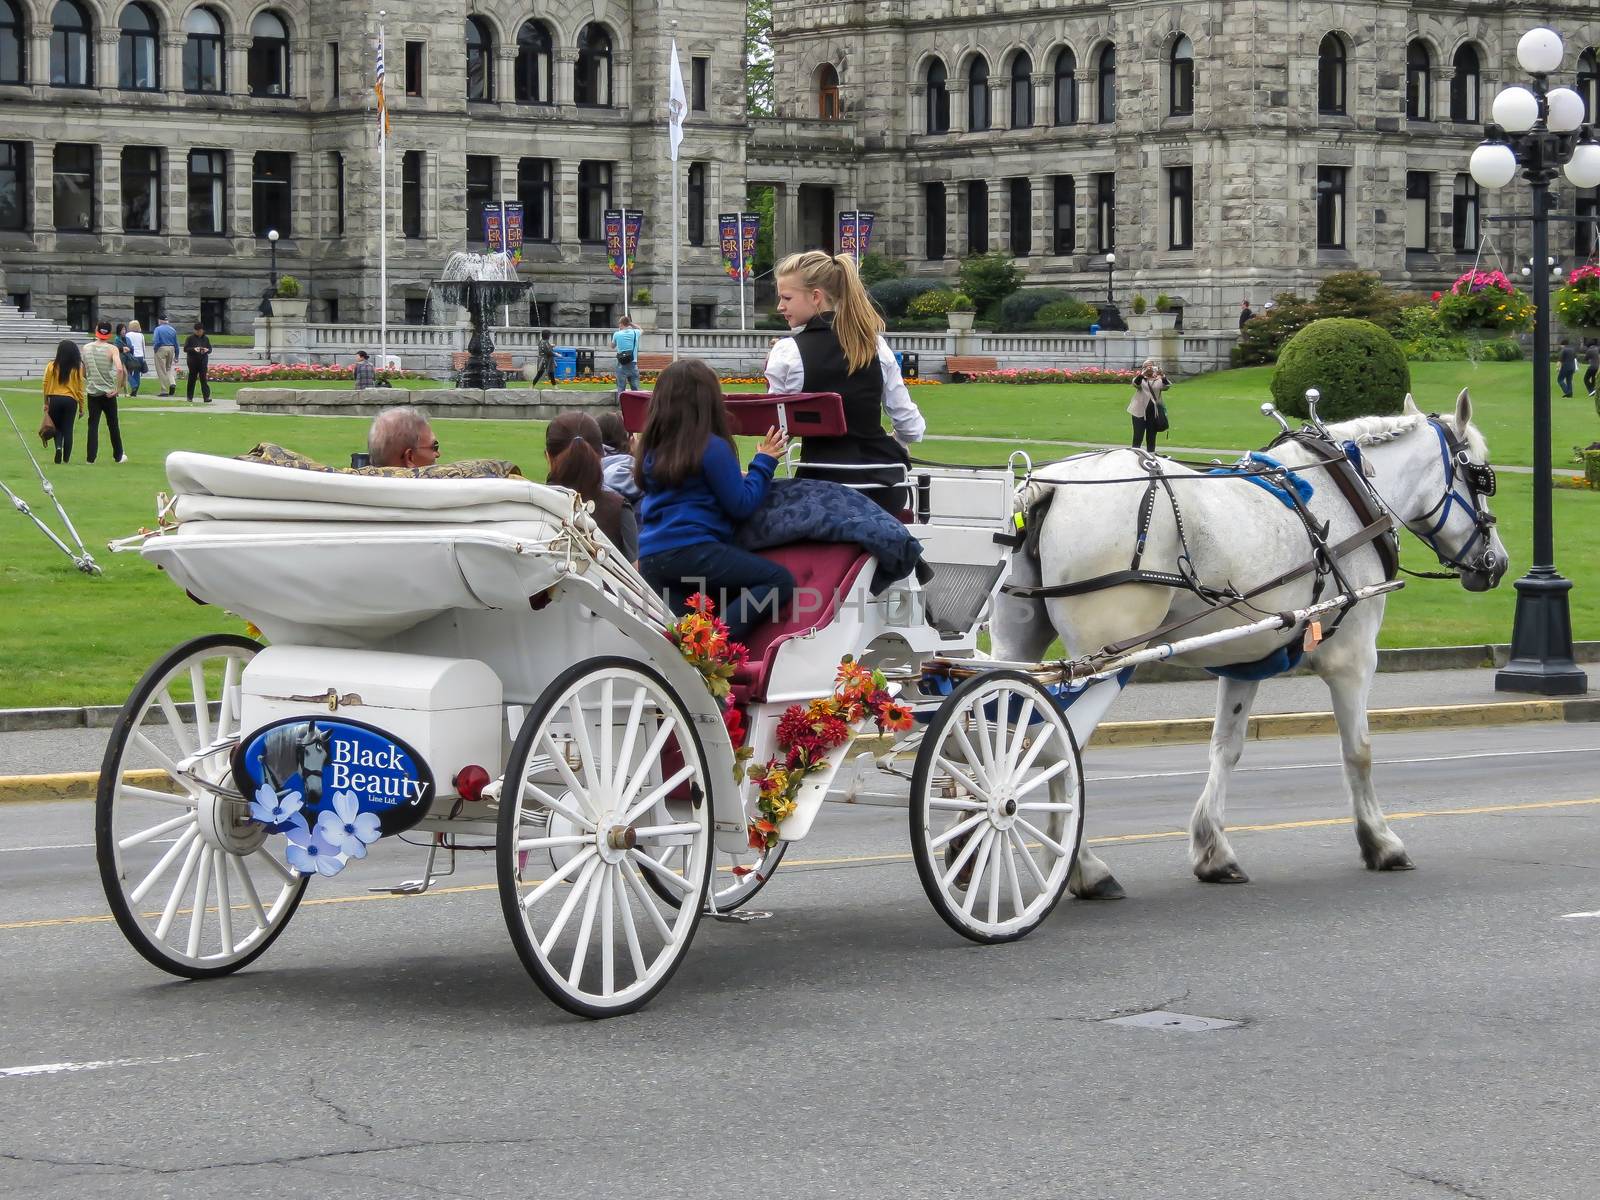 Victoria, British Columbia, Canada- June 21, 2012: A horse and carriage take tourists along Government Street on a lovely sunny summer day in this popular city in the Pacific Northwest.